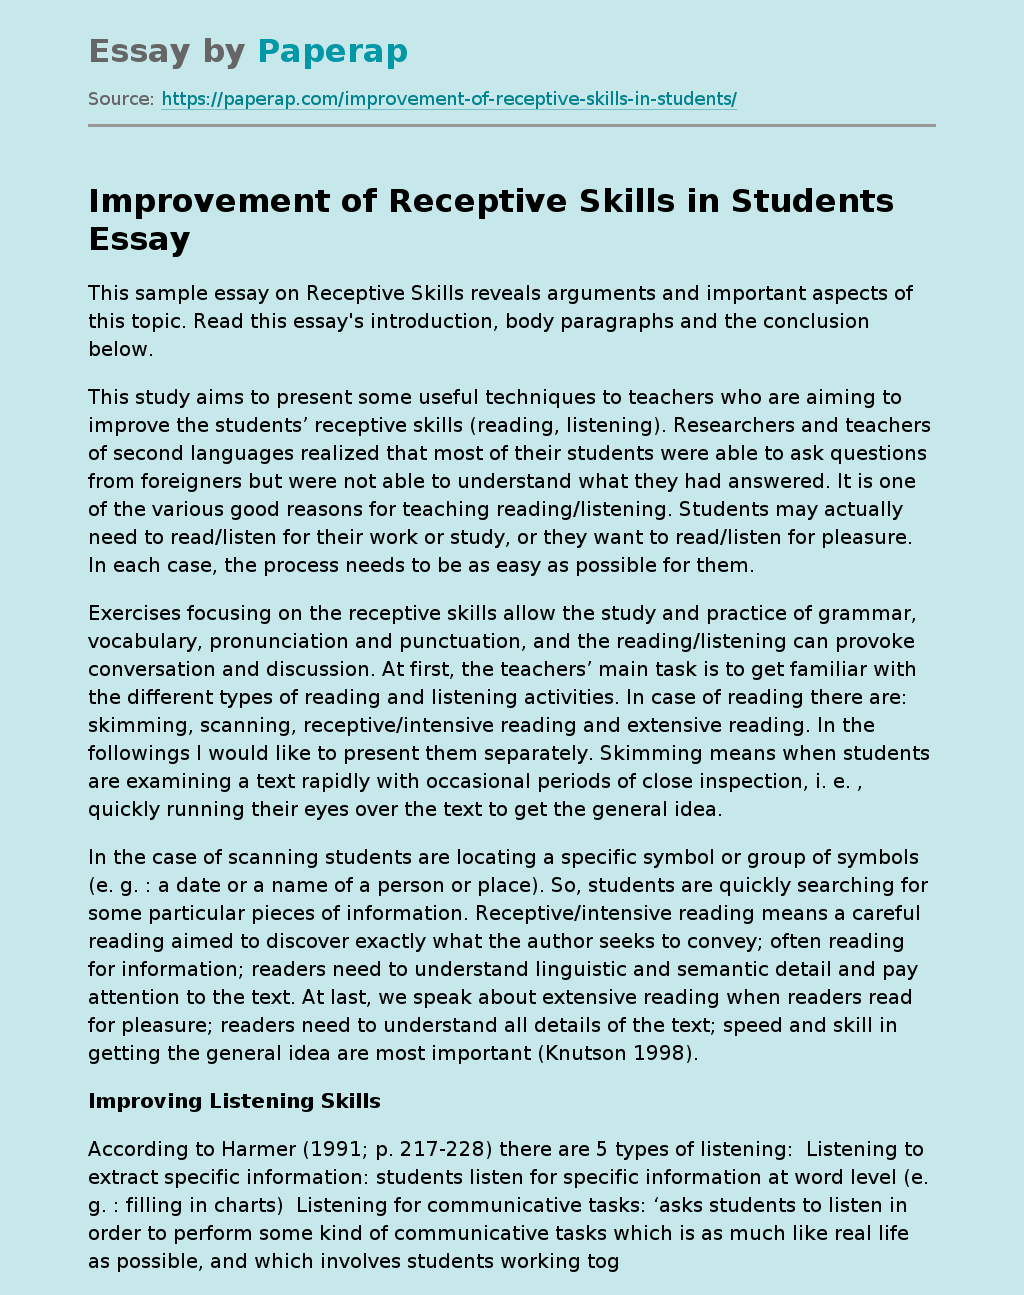 Improvement of Receptive Skills in Students